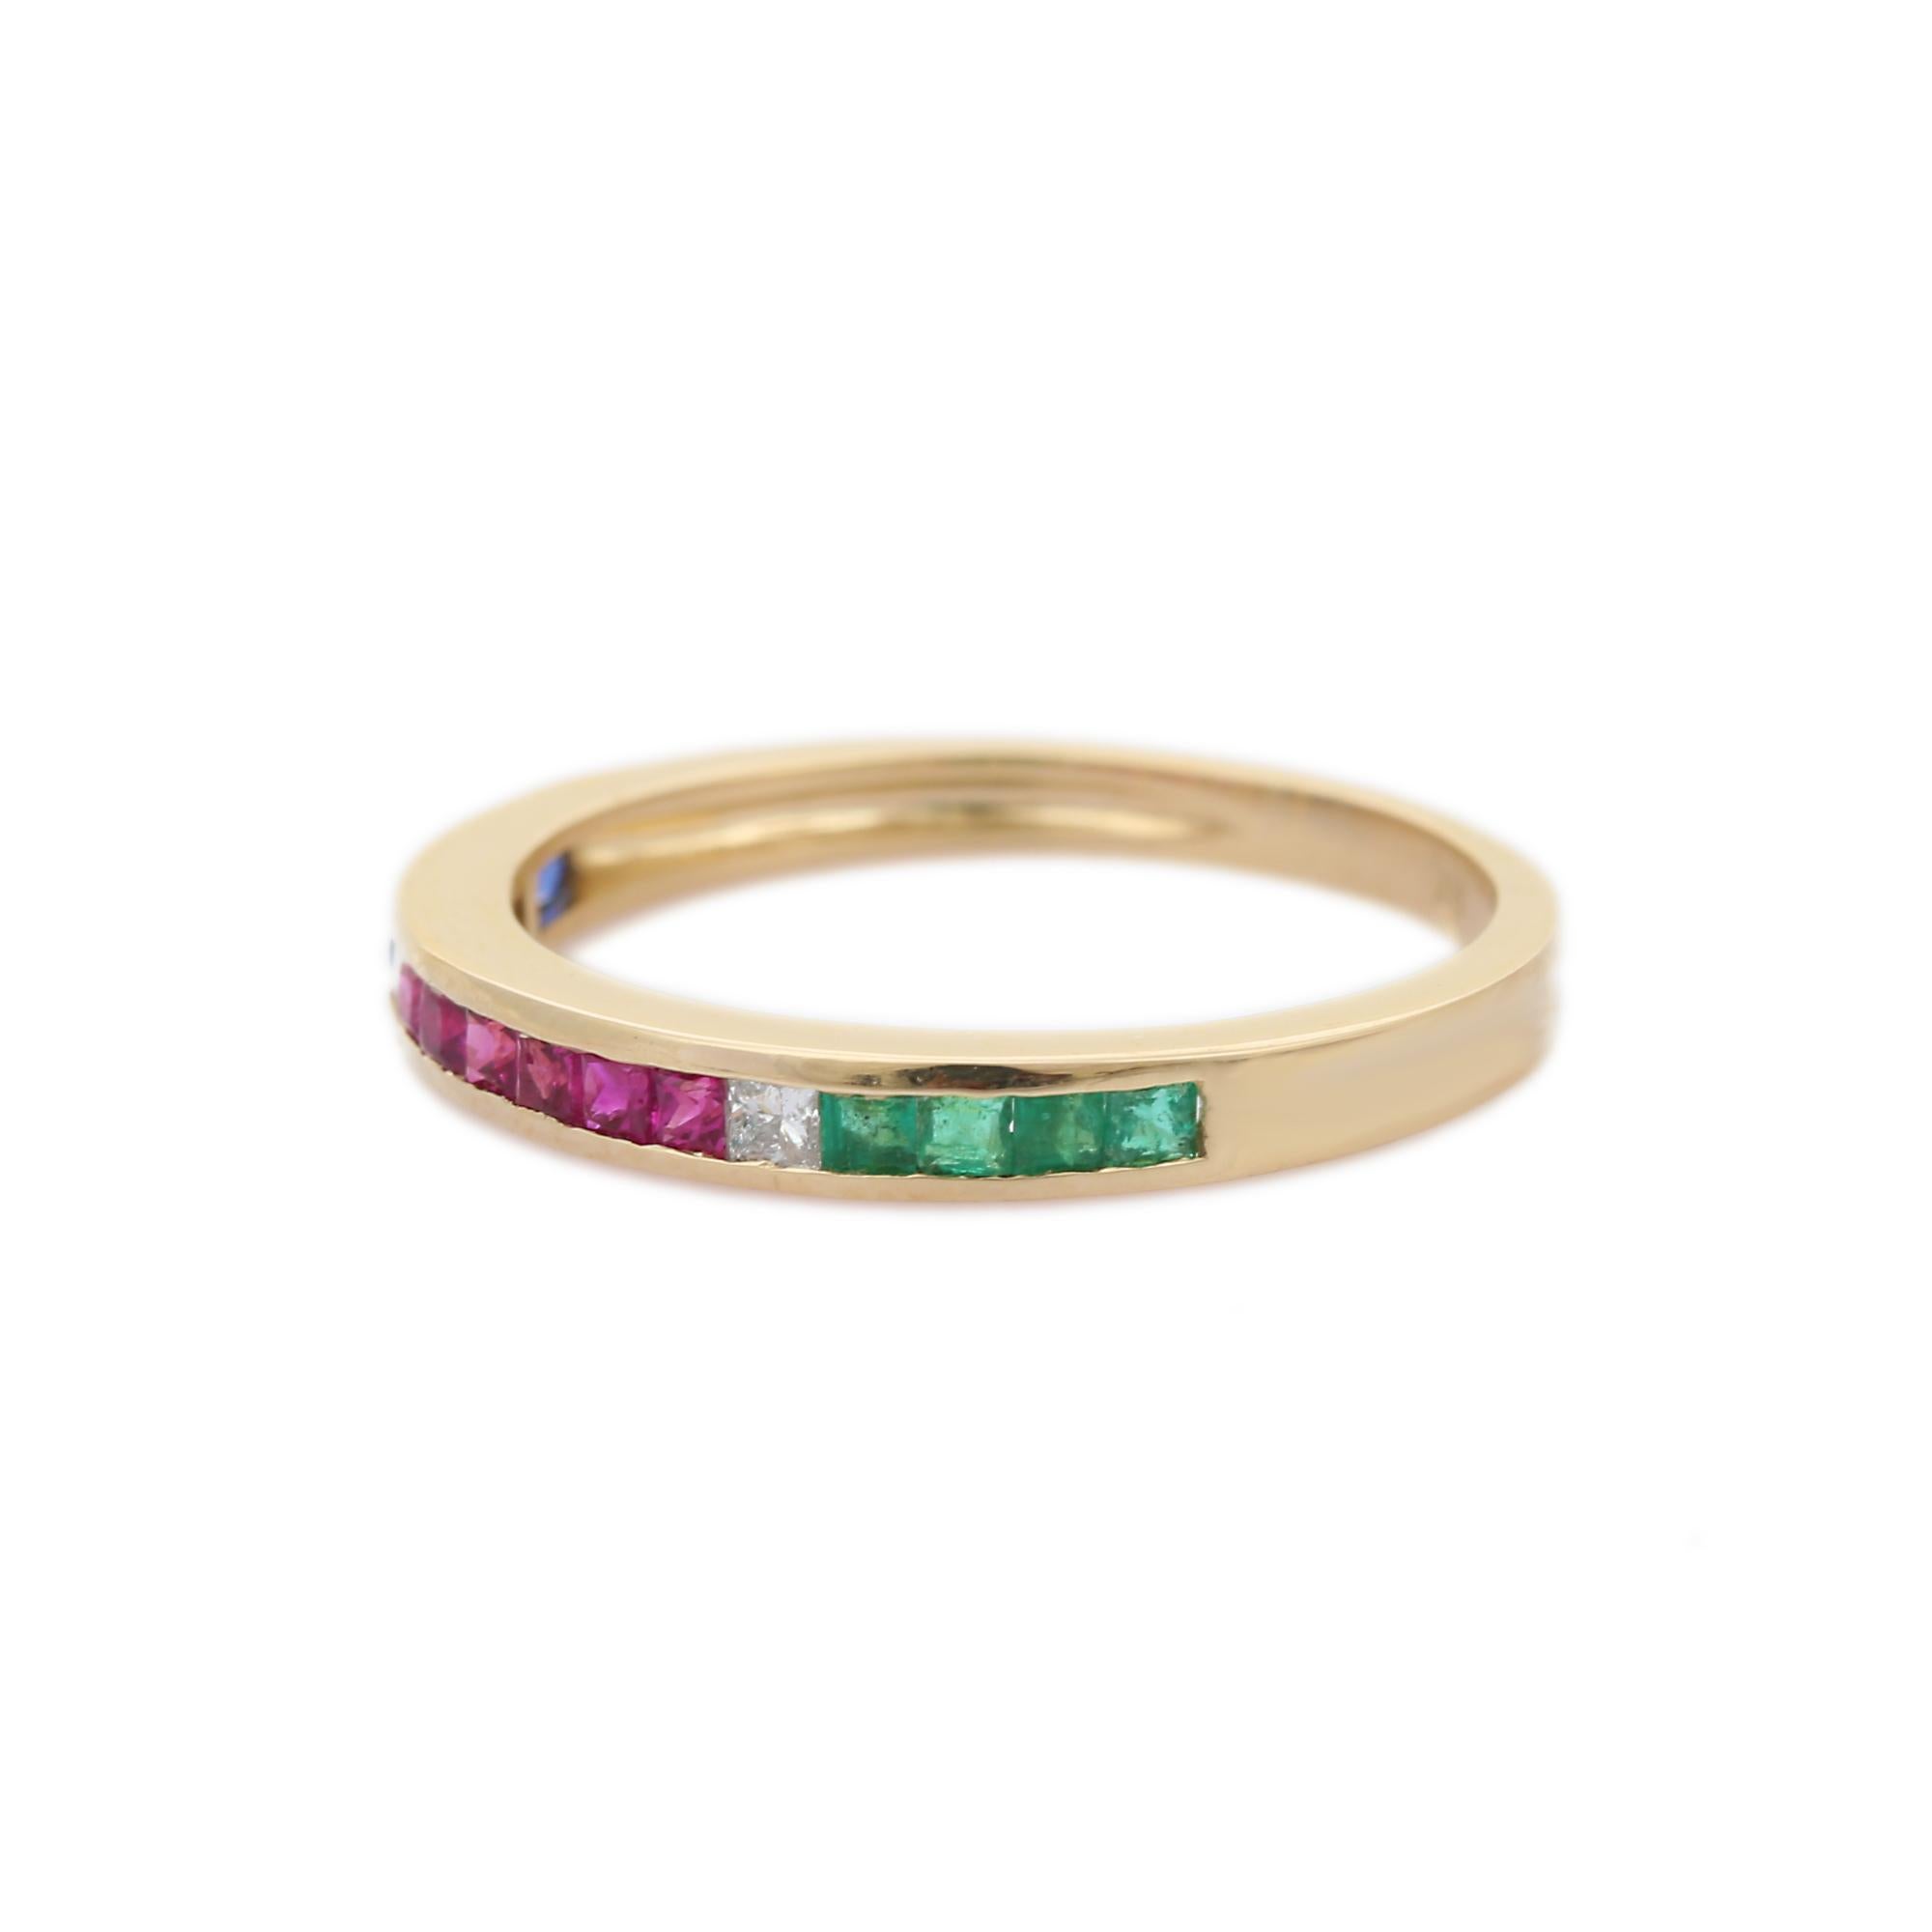 For Sale:  Stackable Emerald, Ruby and Sapphire Band Ring in 14k Solid Yellow Gold 3